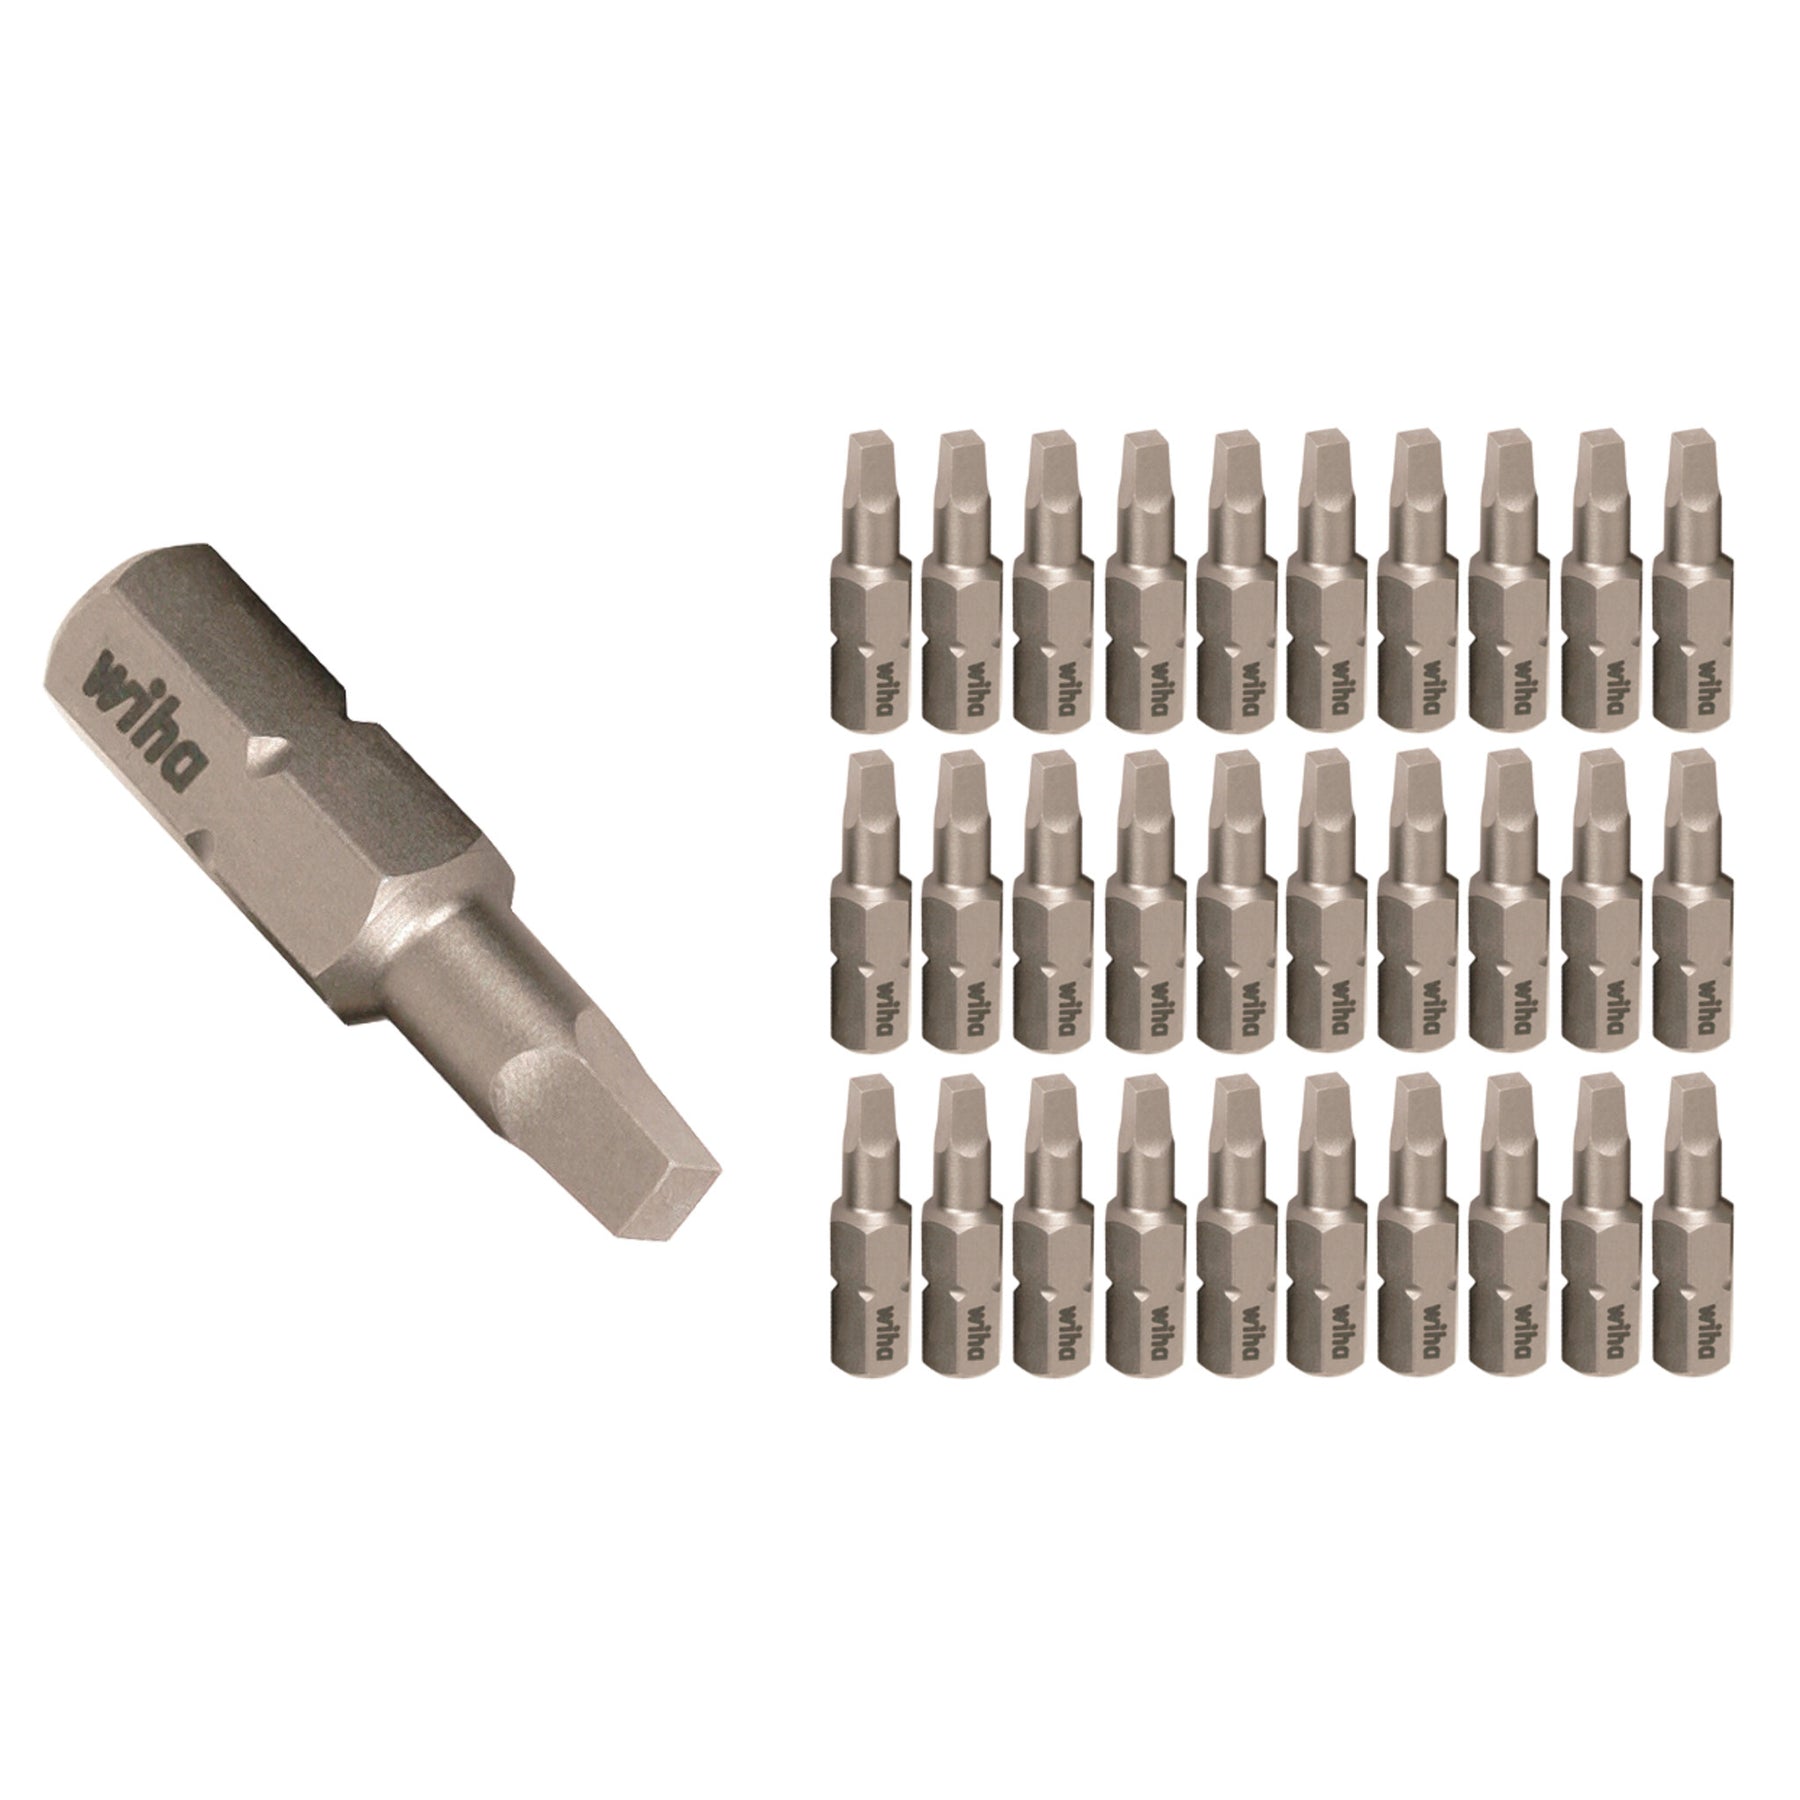 Square Contractor Bits #1 - 25mm - 30 Pack